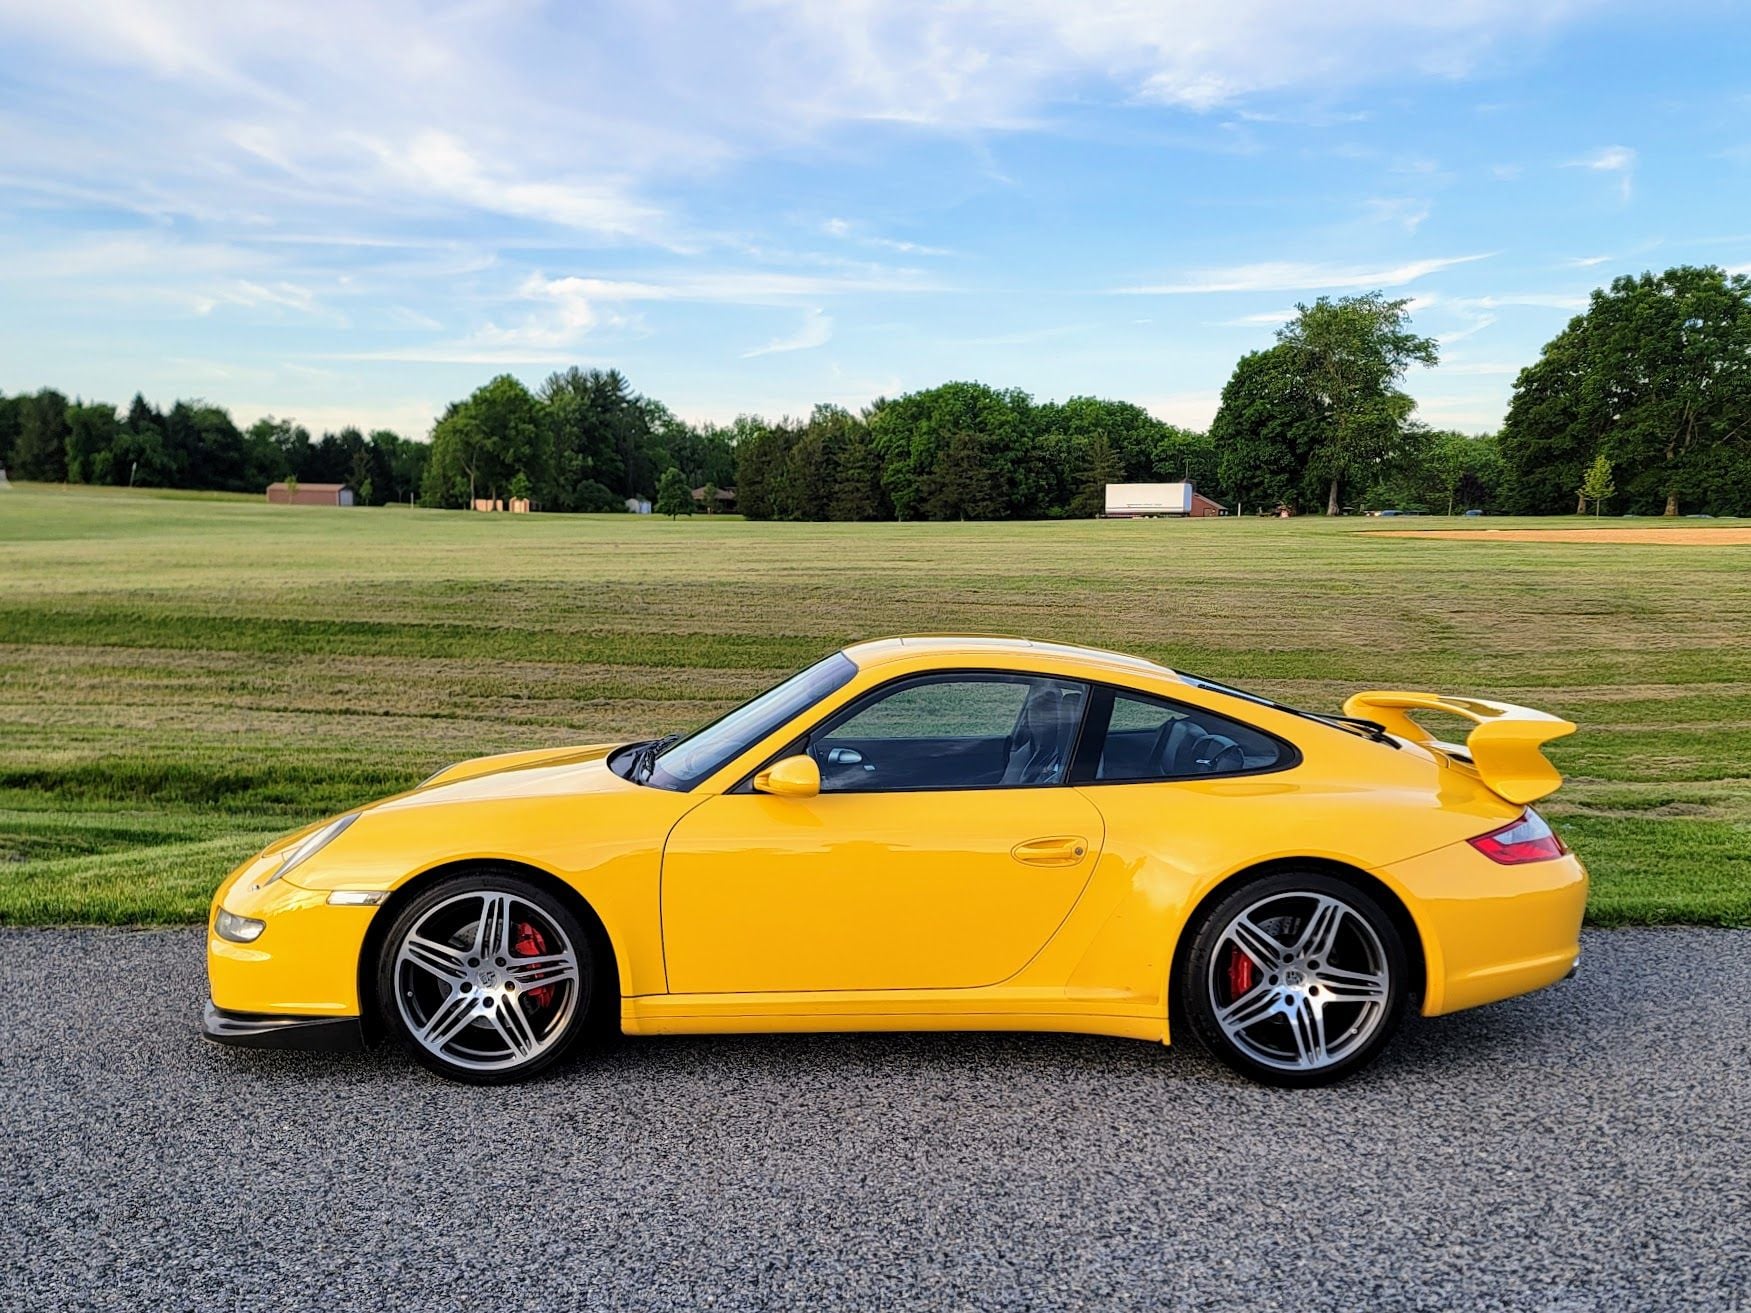 2007 Porsche 911 - 2007 911 C4S Speed Yellow with Factory Aerokit 6-speed - Used - VIN WP0AB299X7S731982 - 109,200 Miles - 6 cyl - AWD - Manual - Coupe - Yellow - Whitehouse Station, NJ 08889, United States